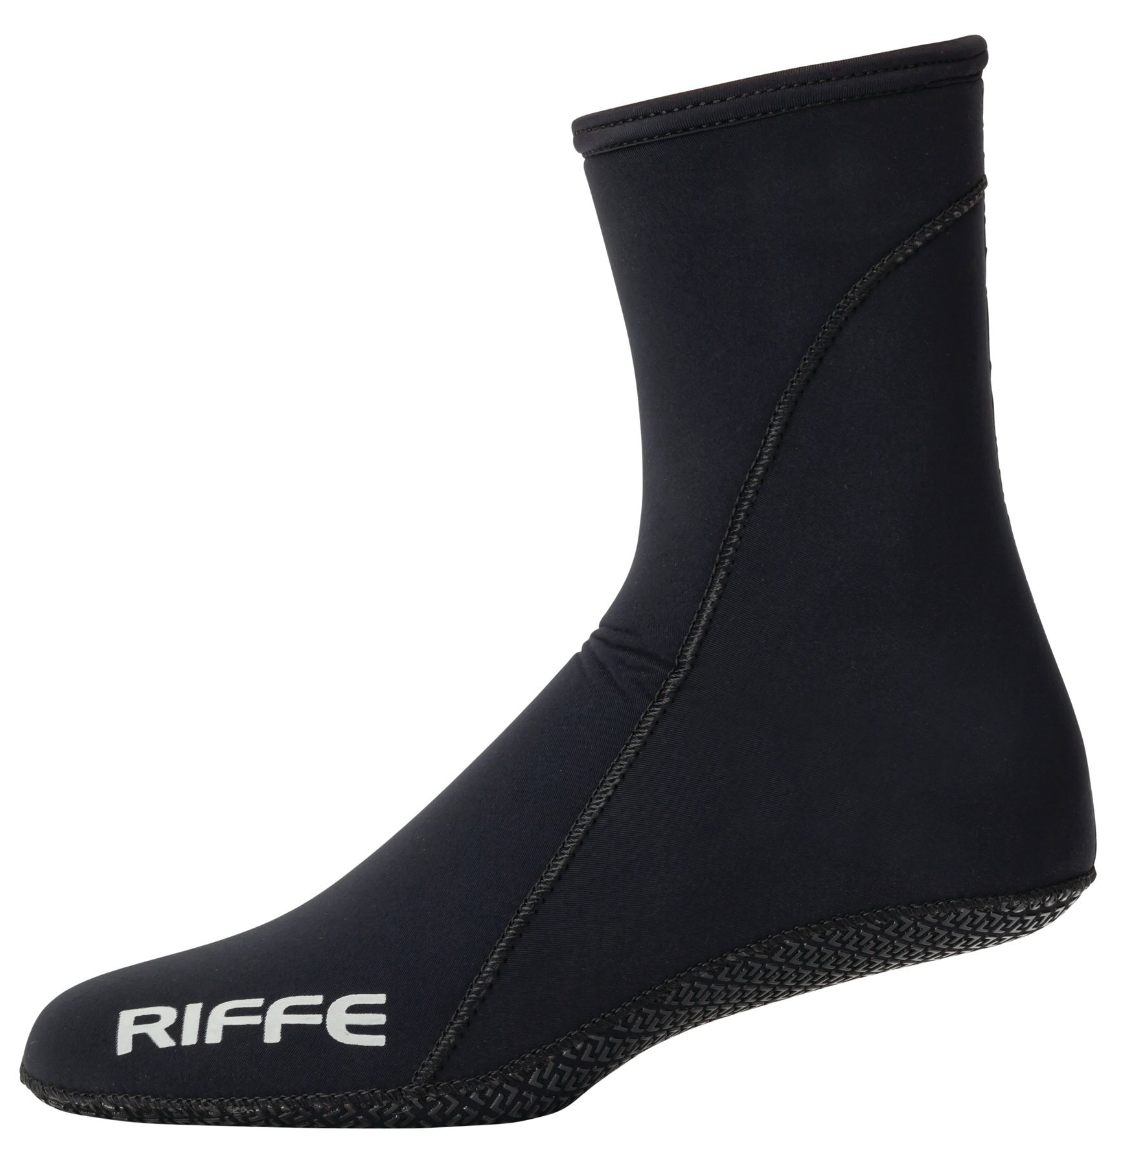 Riffe 3.5MM DIVE SOCK WITH NON-SKID SOLES